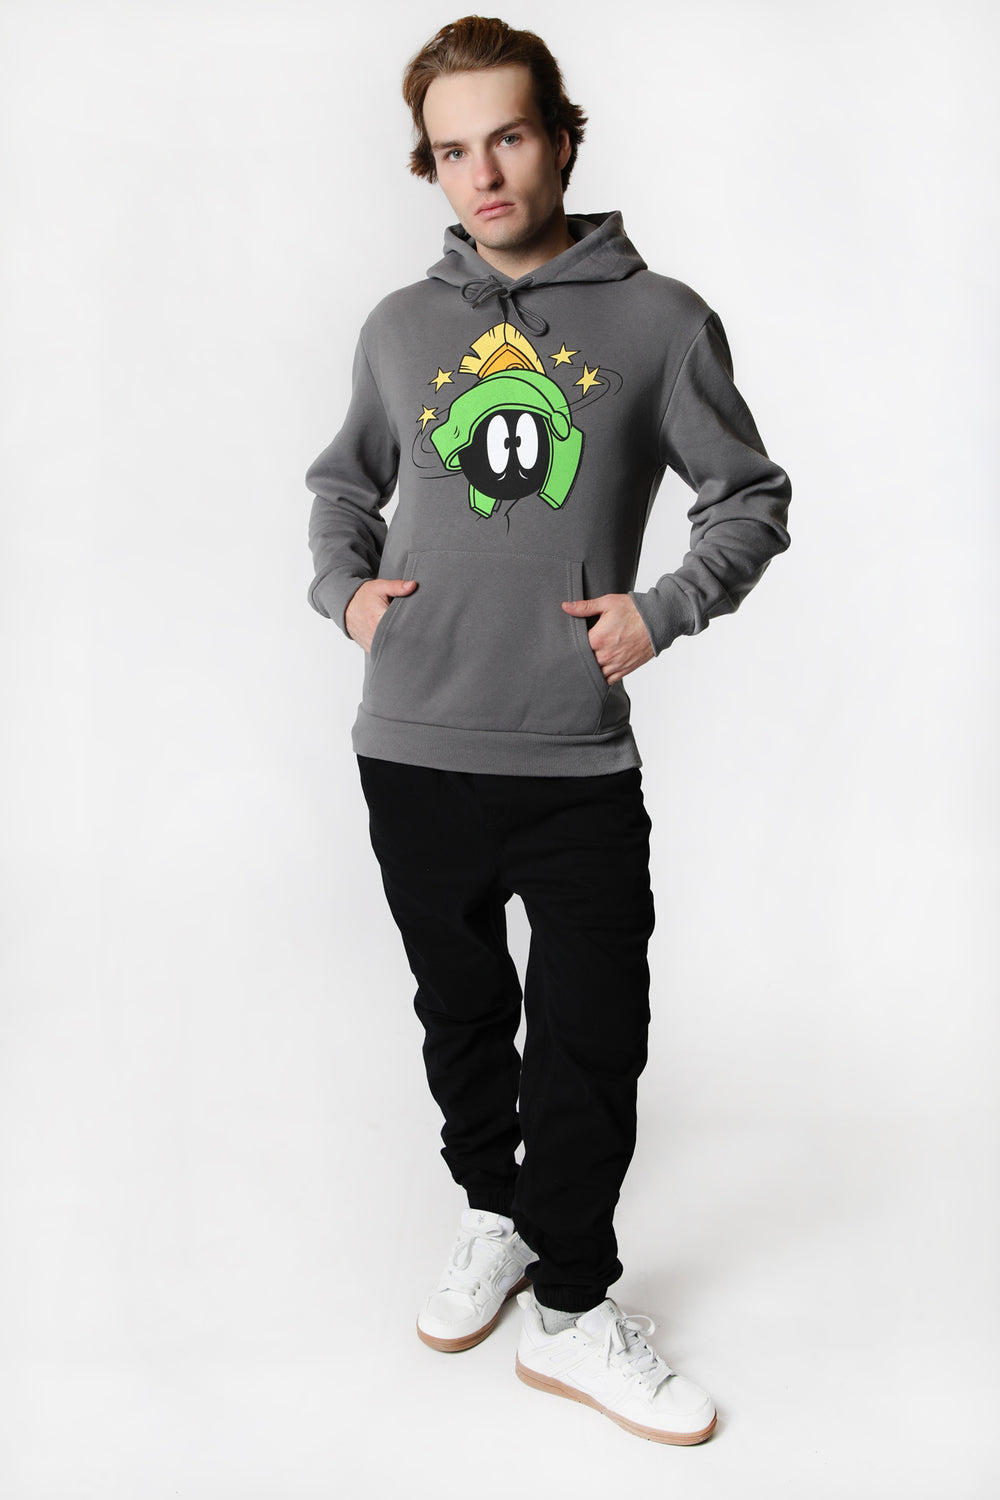 Mens Marvin The Martian Hoodie Mens Marvin The Martian Hoodie